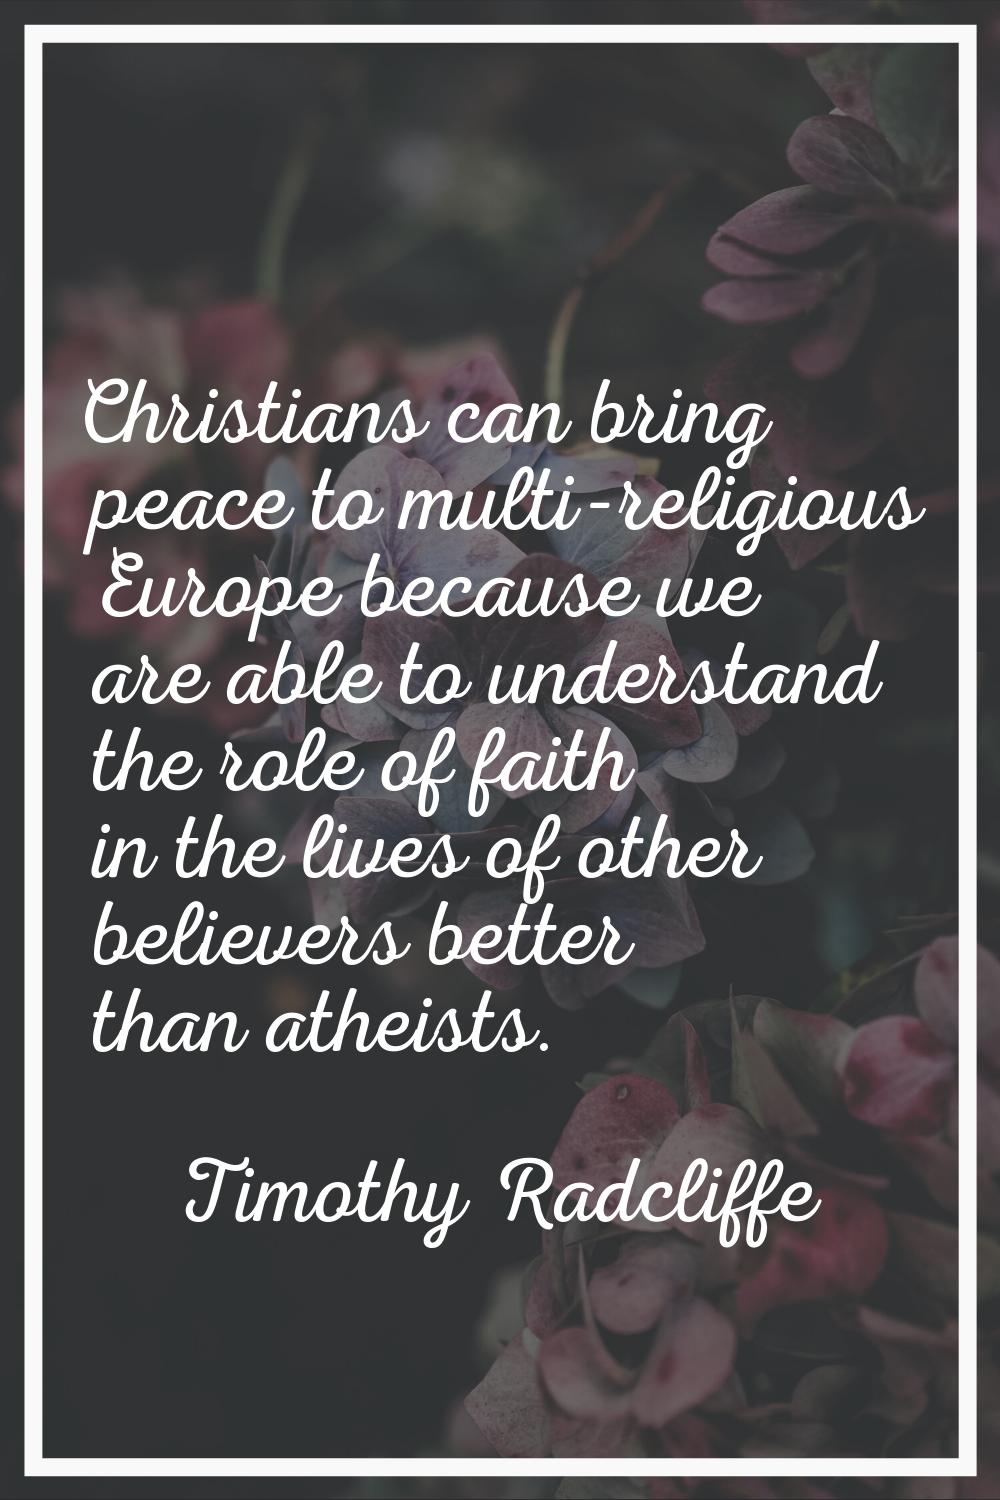 Christians can bring peace to multi-religious Europe because we are able to understand the role of 